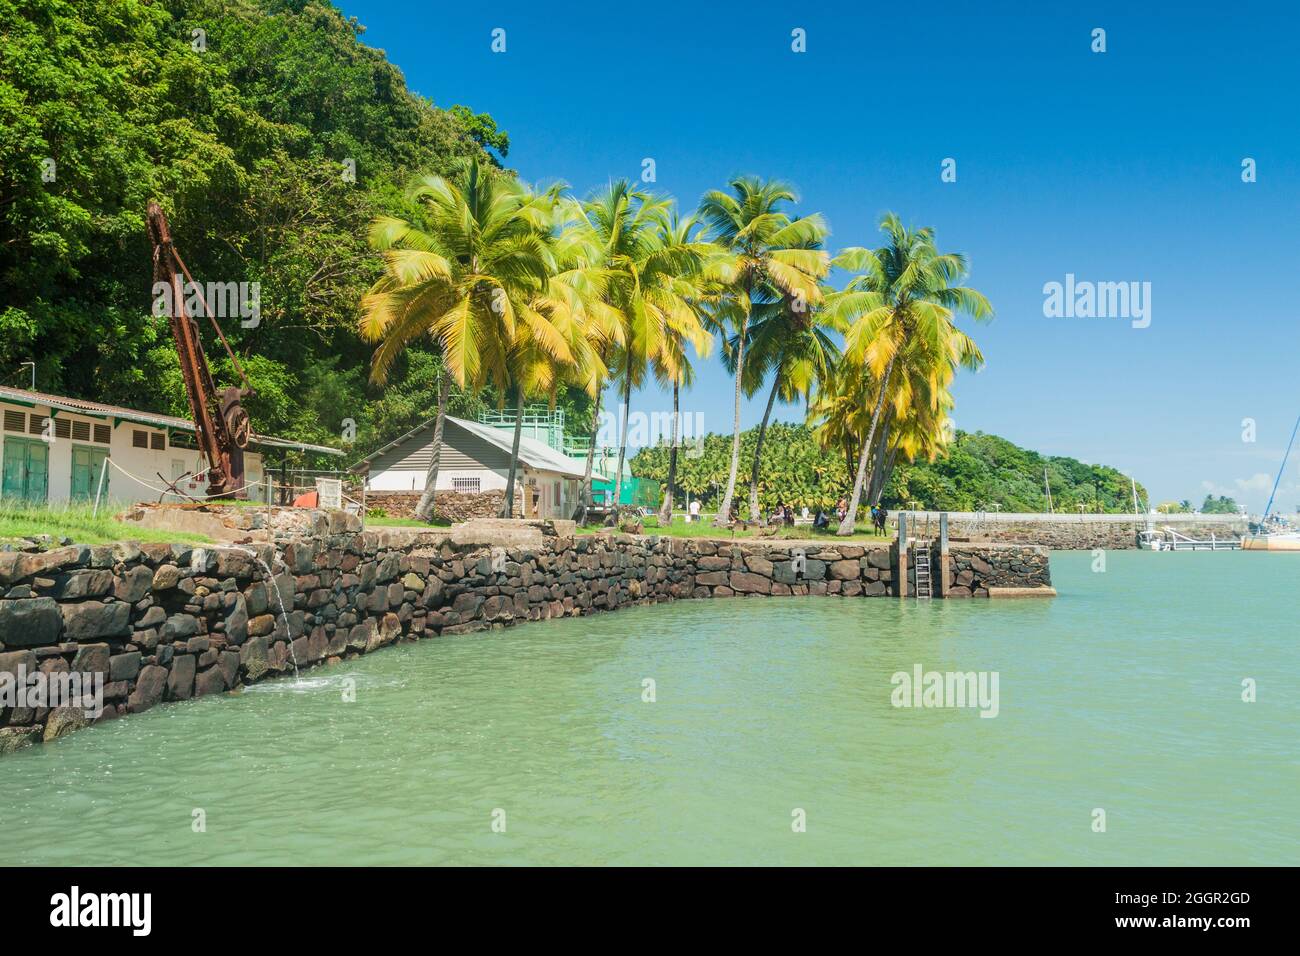 Coast of Ile Royale, one of the islands of Iles du Salut (Islands of Salvation) in French Guiana Stock Photo